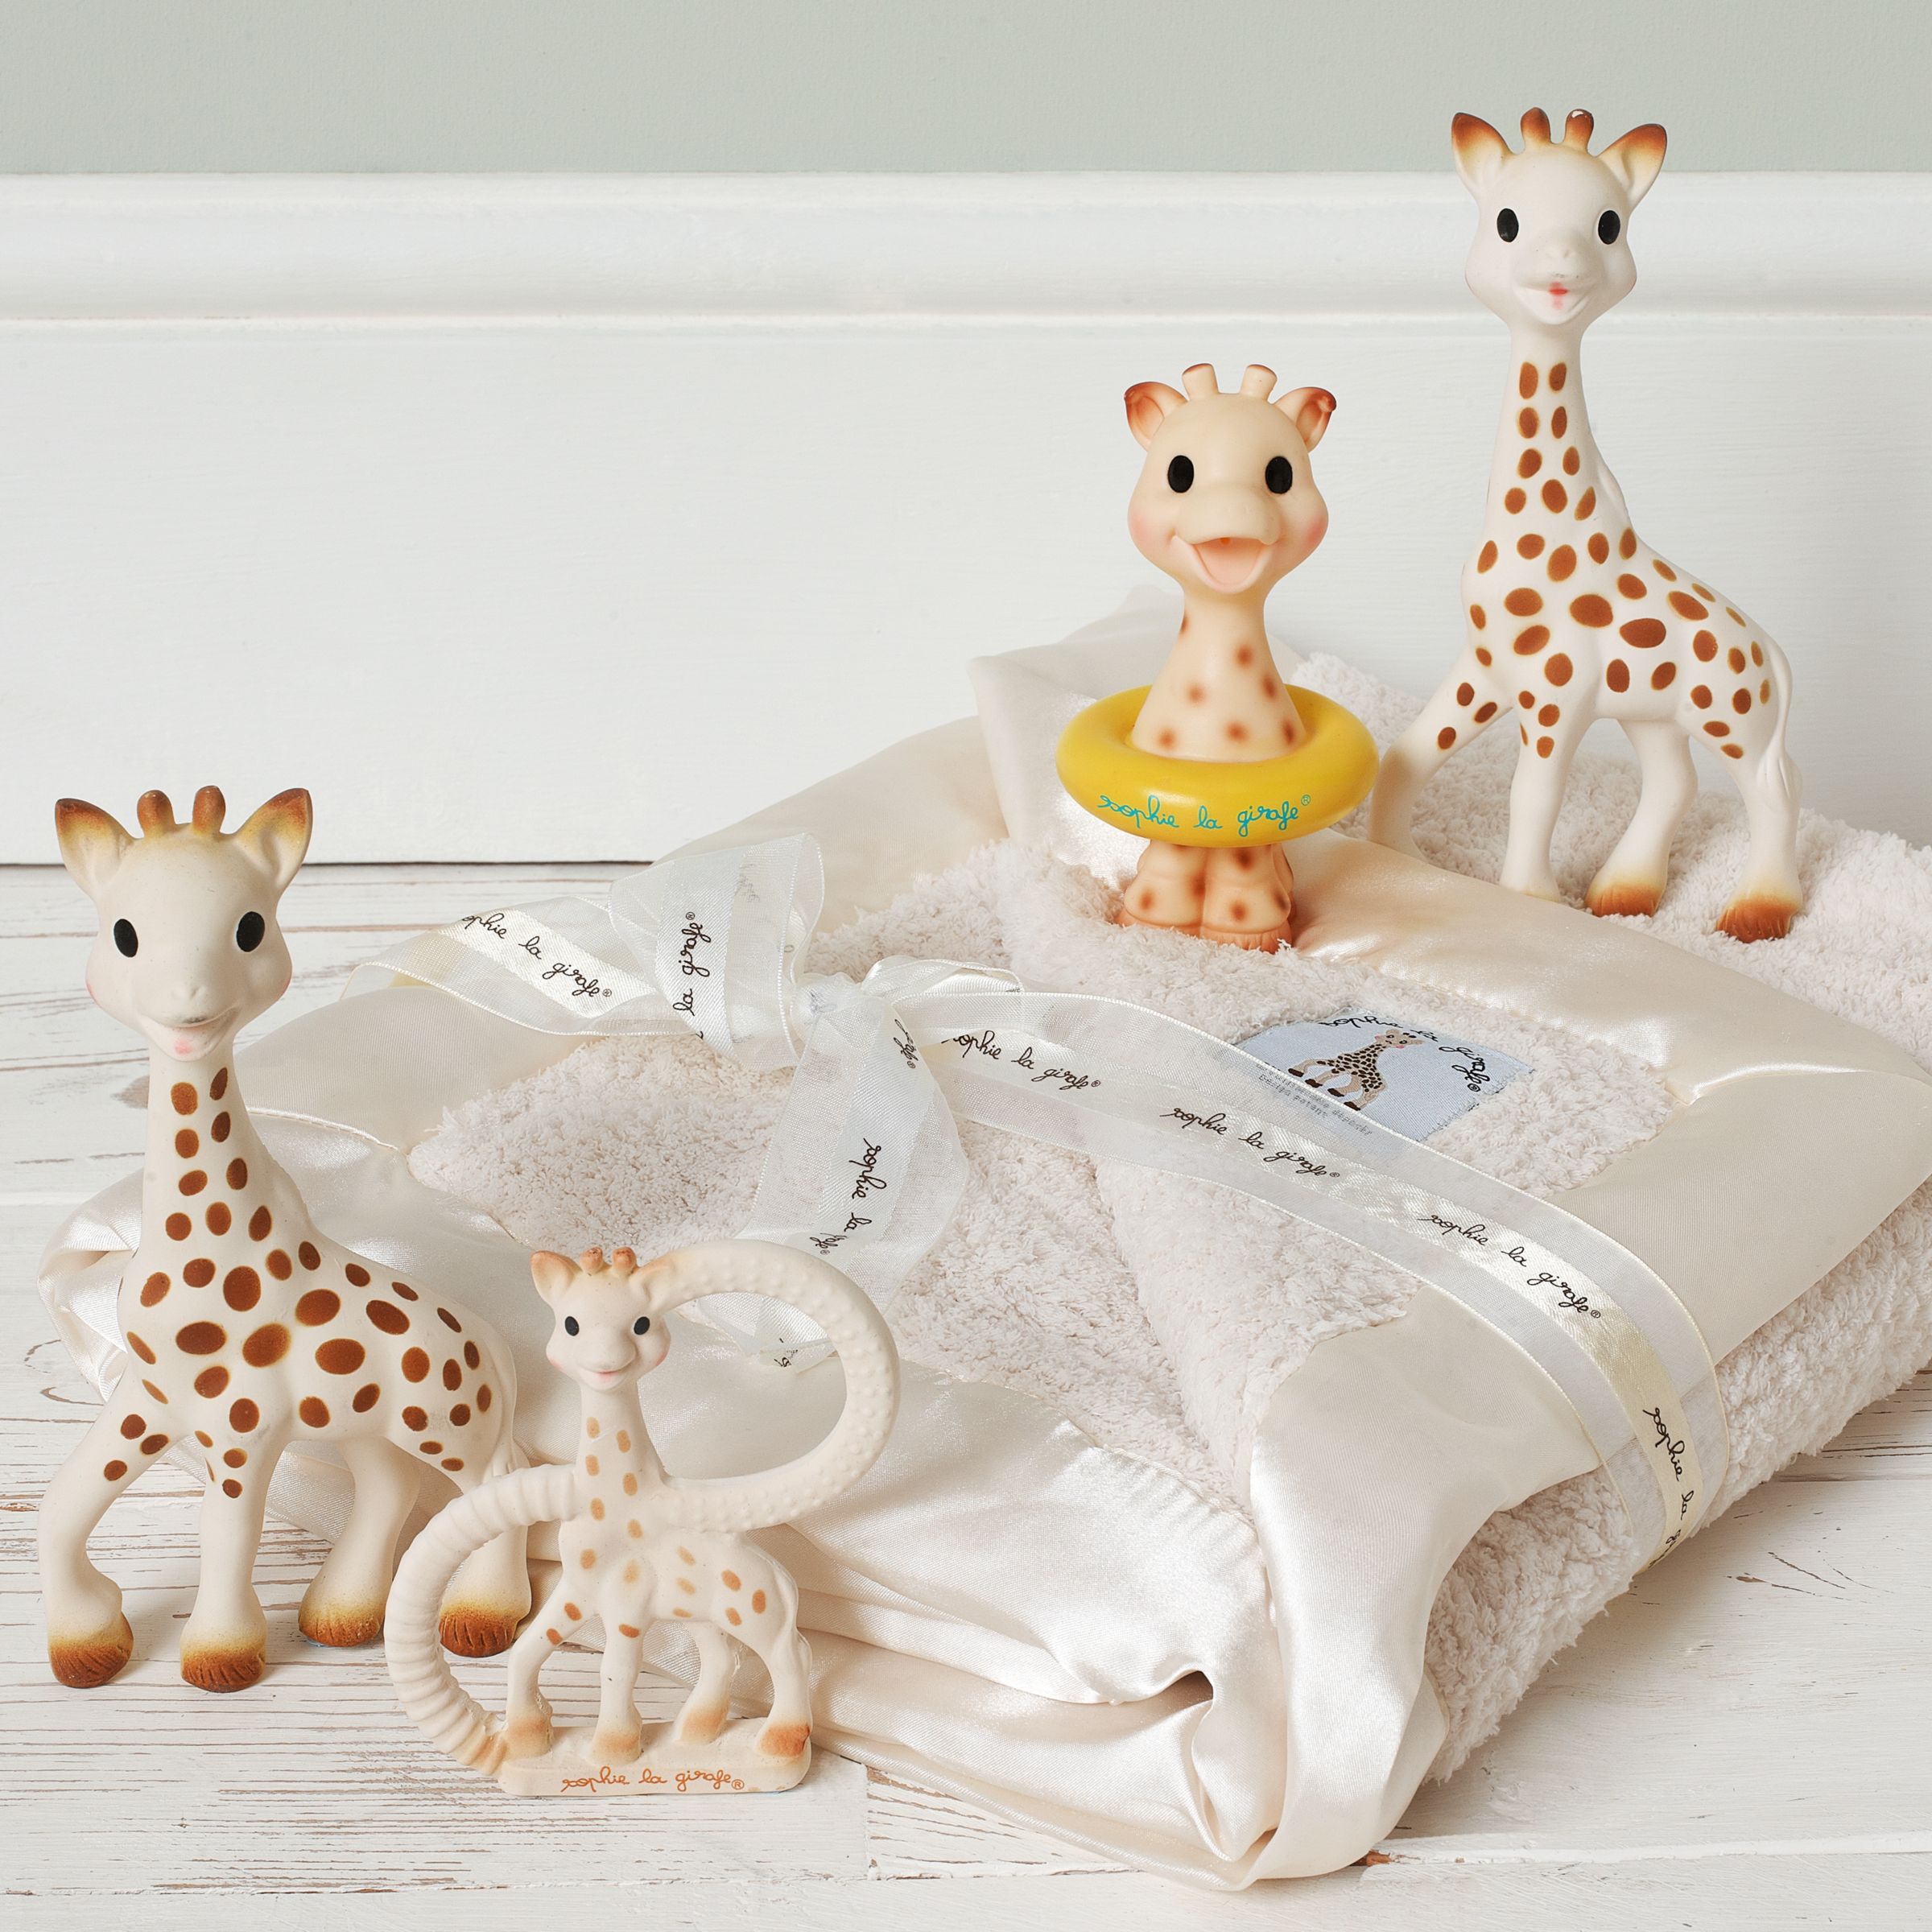 Sophie The Giraffe Teething Toys Can Grow Mold—What You Should Know